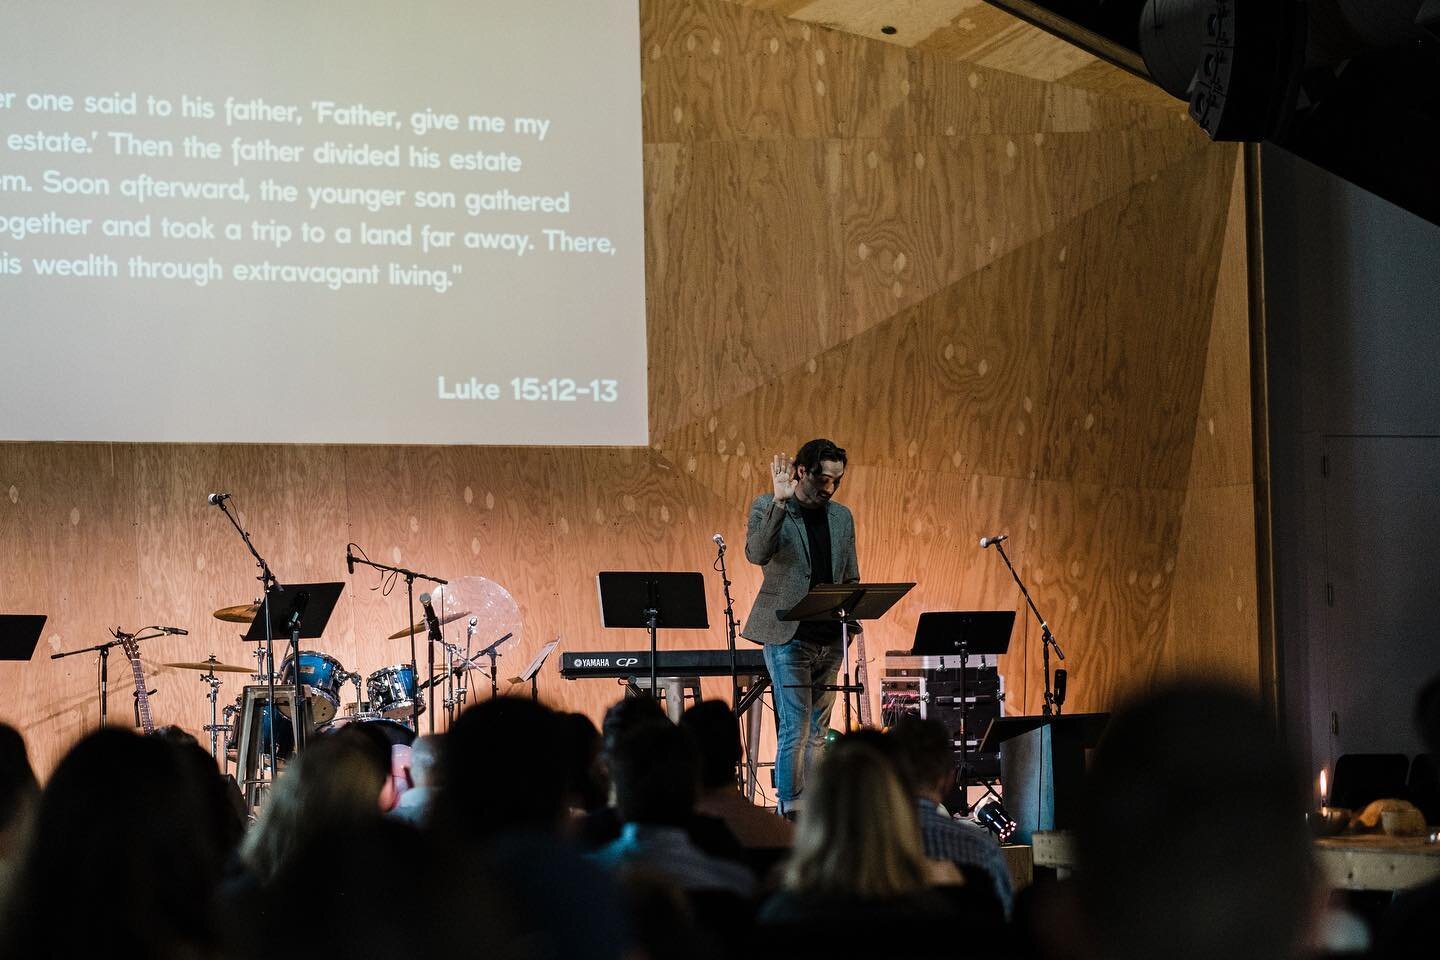 So good to worship together yesterday. If you missed our service you can watch/listen online. But good news, we&rsquo;ve got 2 more weeks of the Sermon on the Mount to go.

#missiodei #missioslc Missio #saltlakecity #utah #church